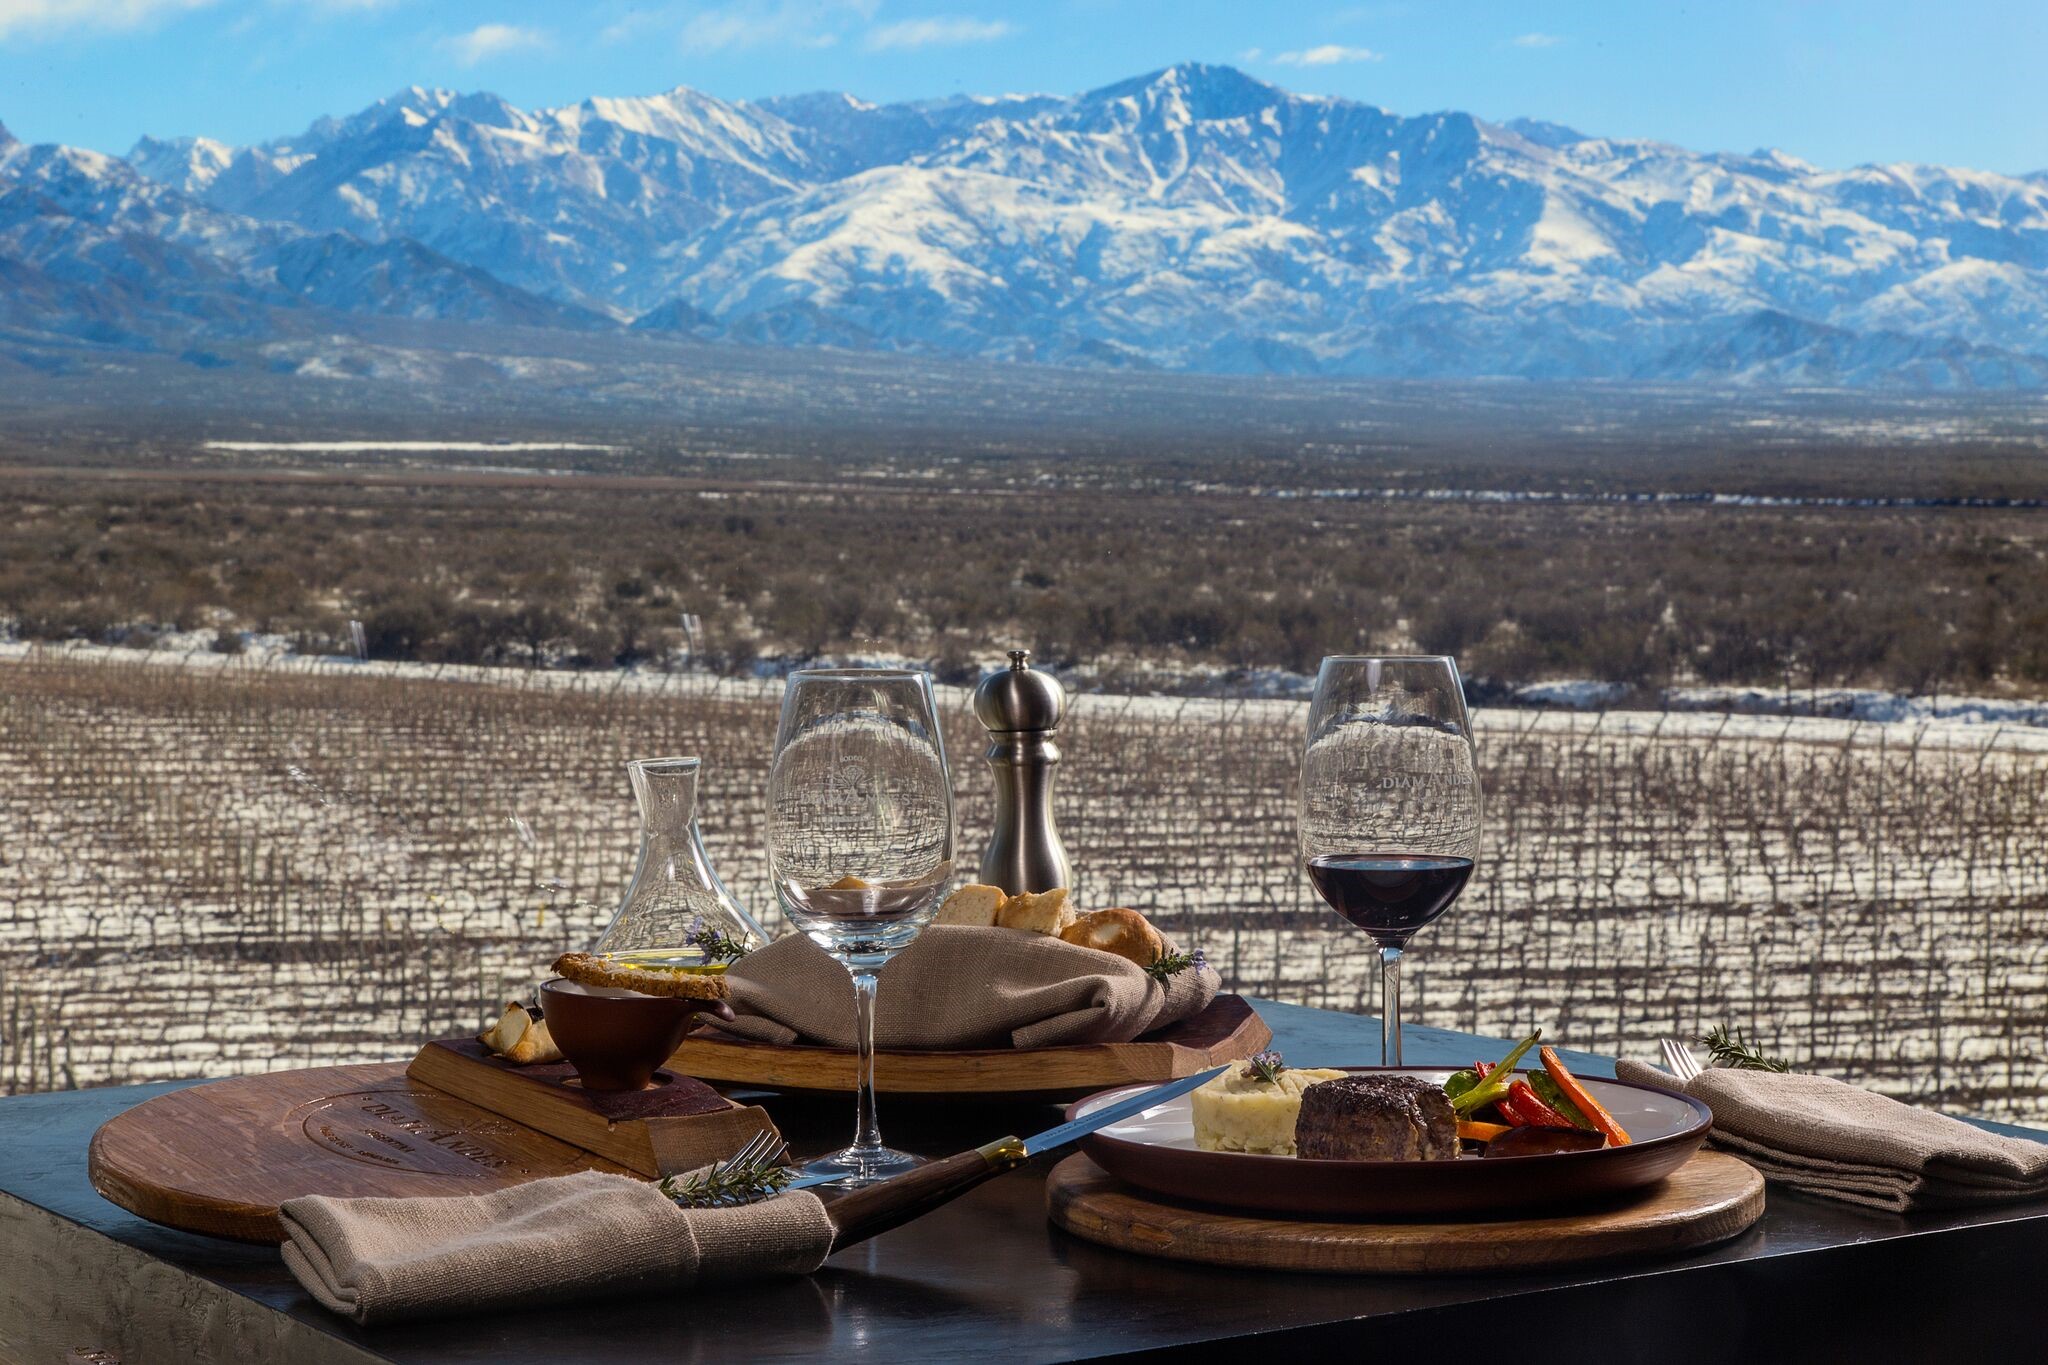 MENDOZA WILL BE THE STAGE TO ANNOUNCE THE WORLD´S BEST VINEYARDS 2022